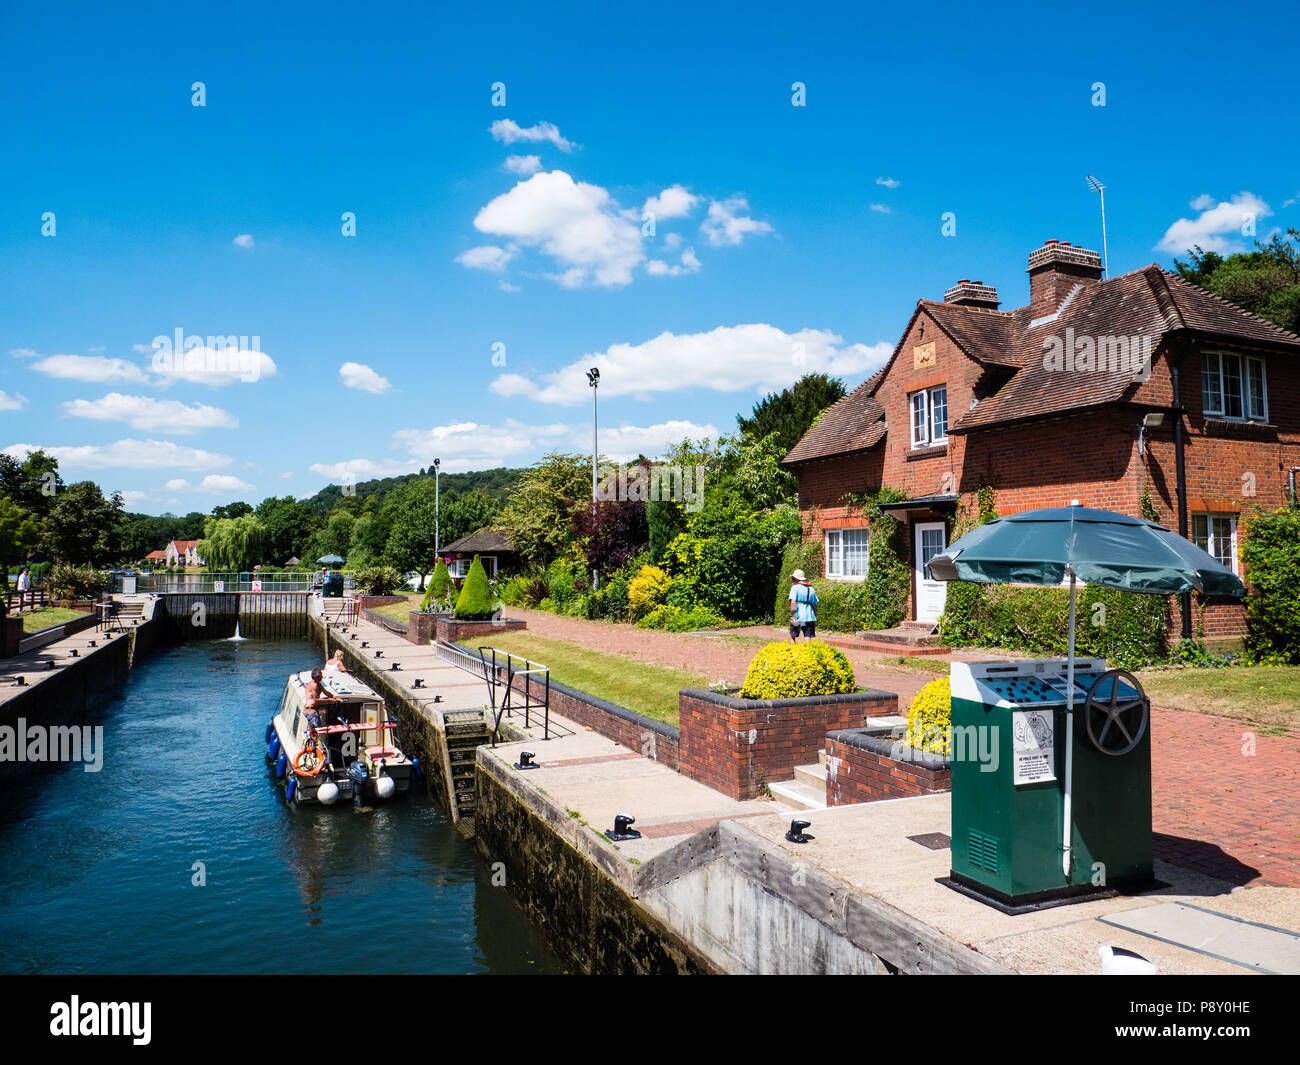 Quirky Boat Using, Hambleden Lock and Weir, River Thames, Berkshire, England, UK, GB. Stock Photo